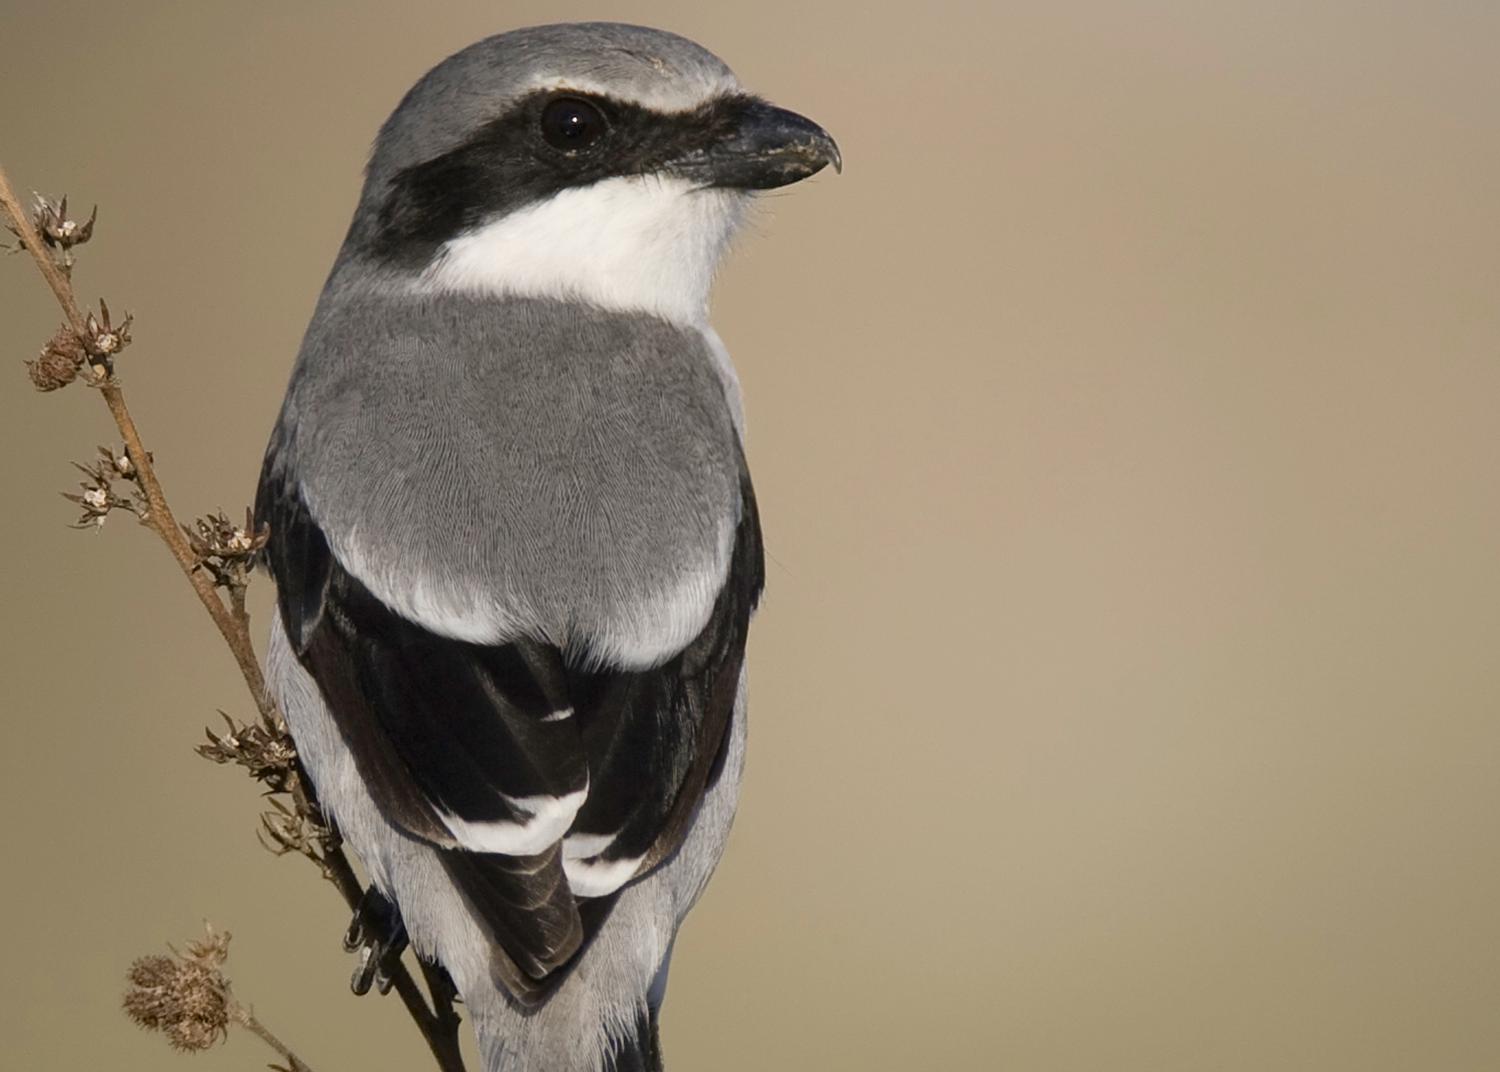 A bird with black and gray feathers perches on a stem.